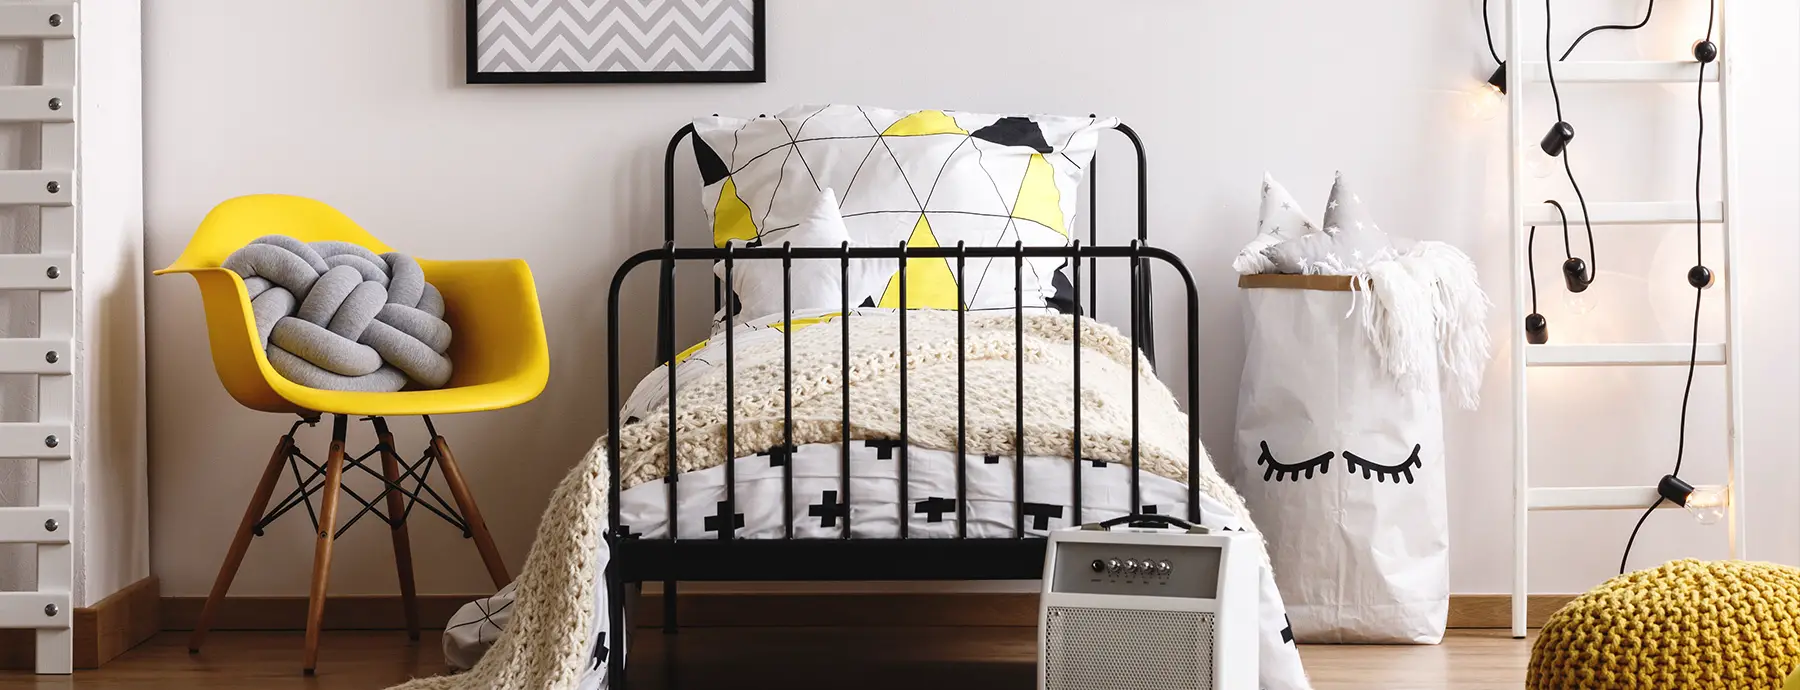 How To Make A Cozy Bedroom For Your Child